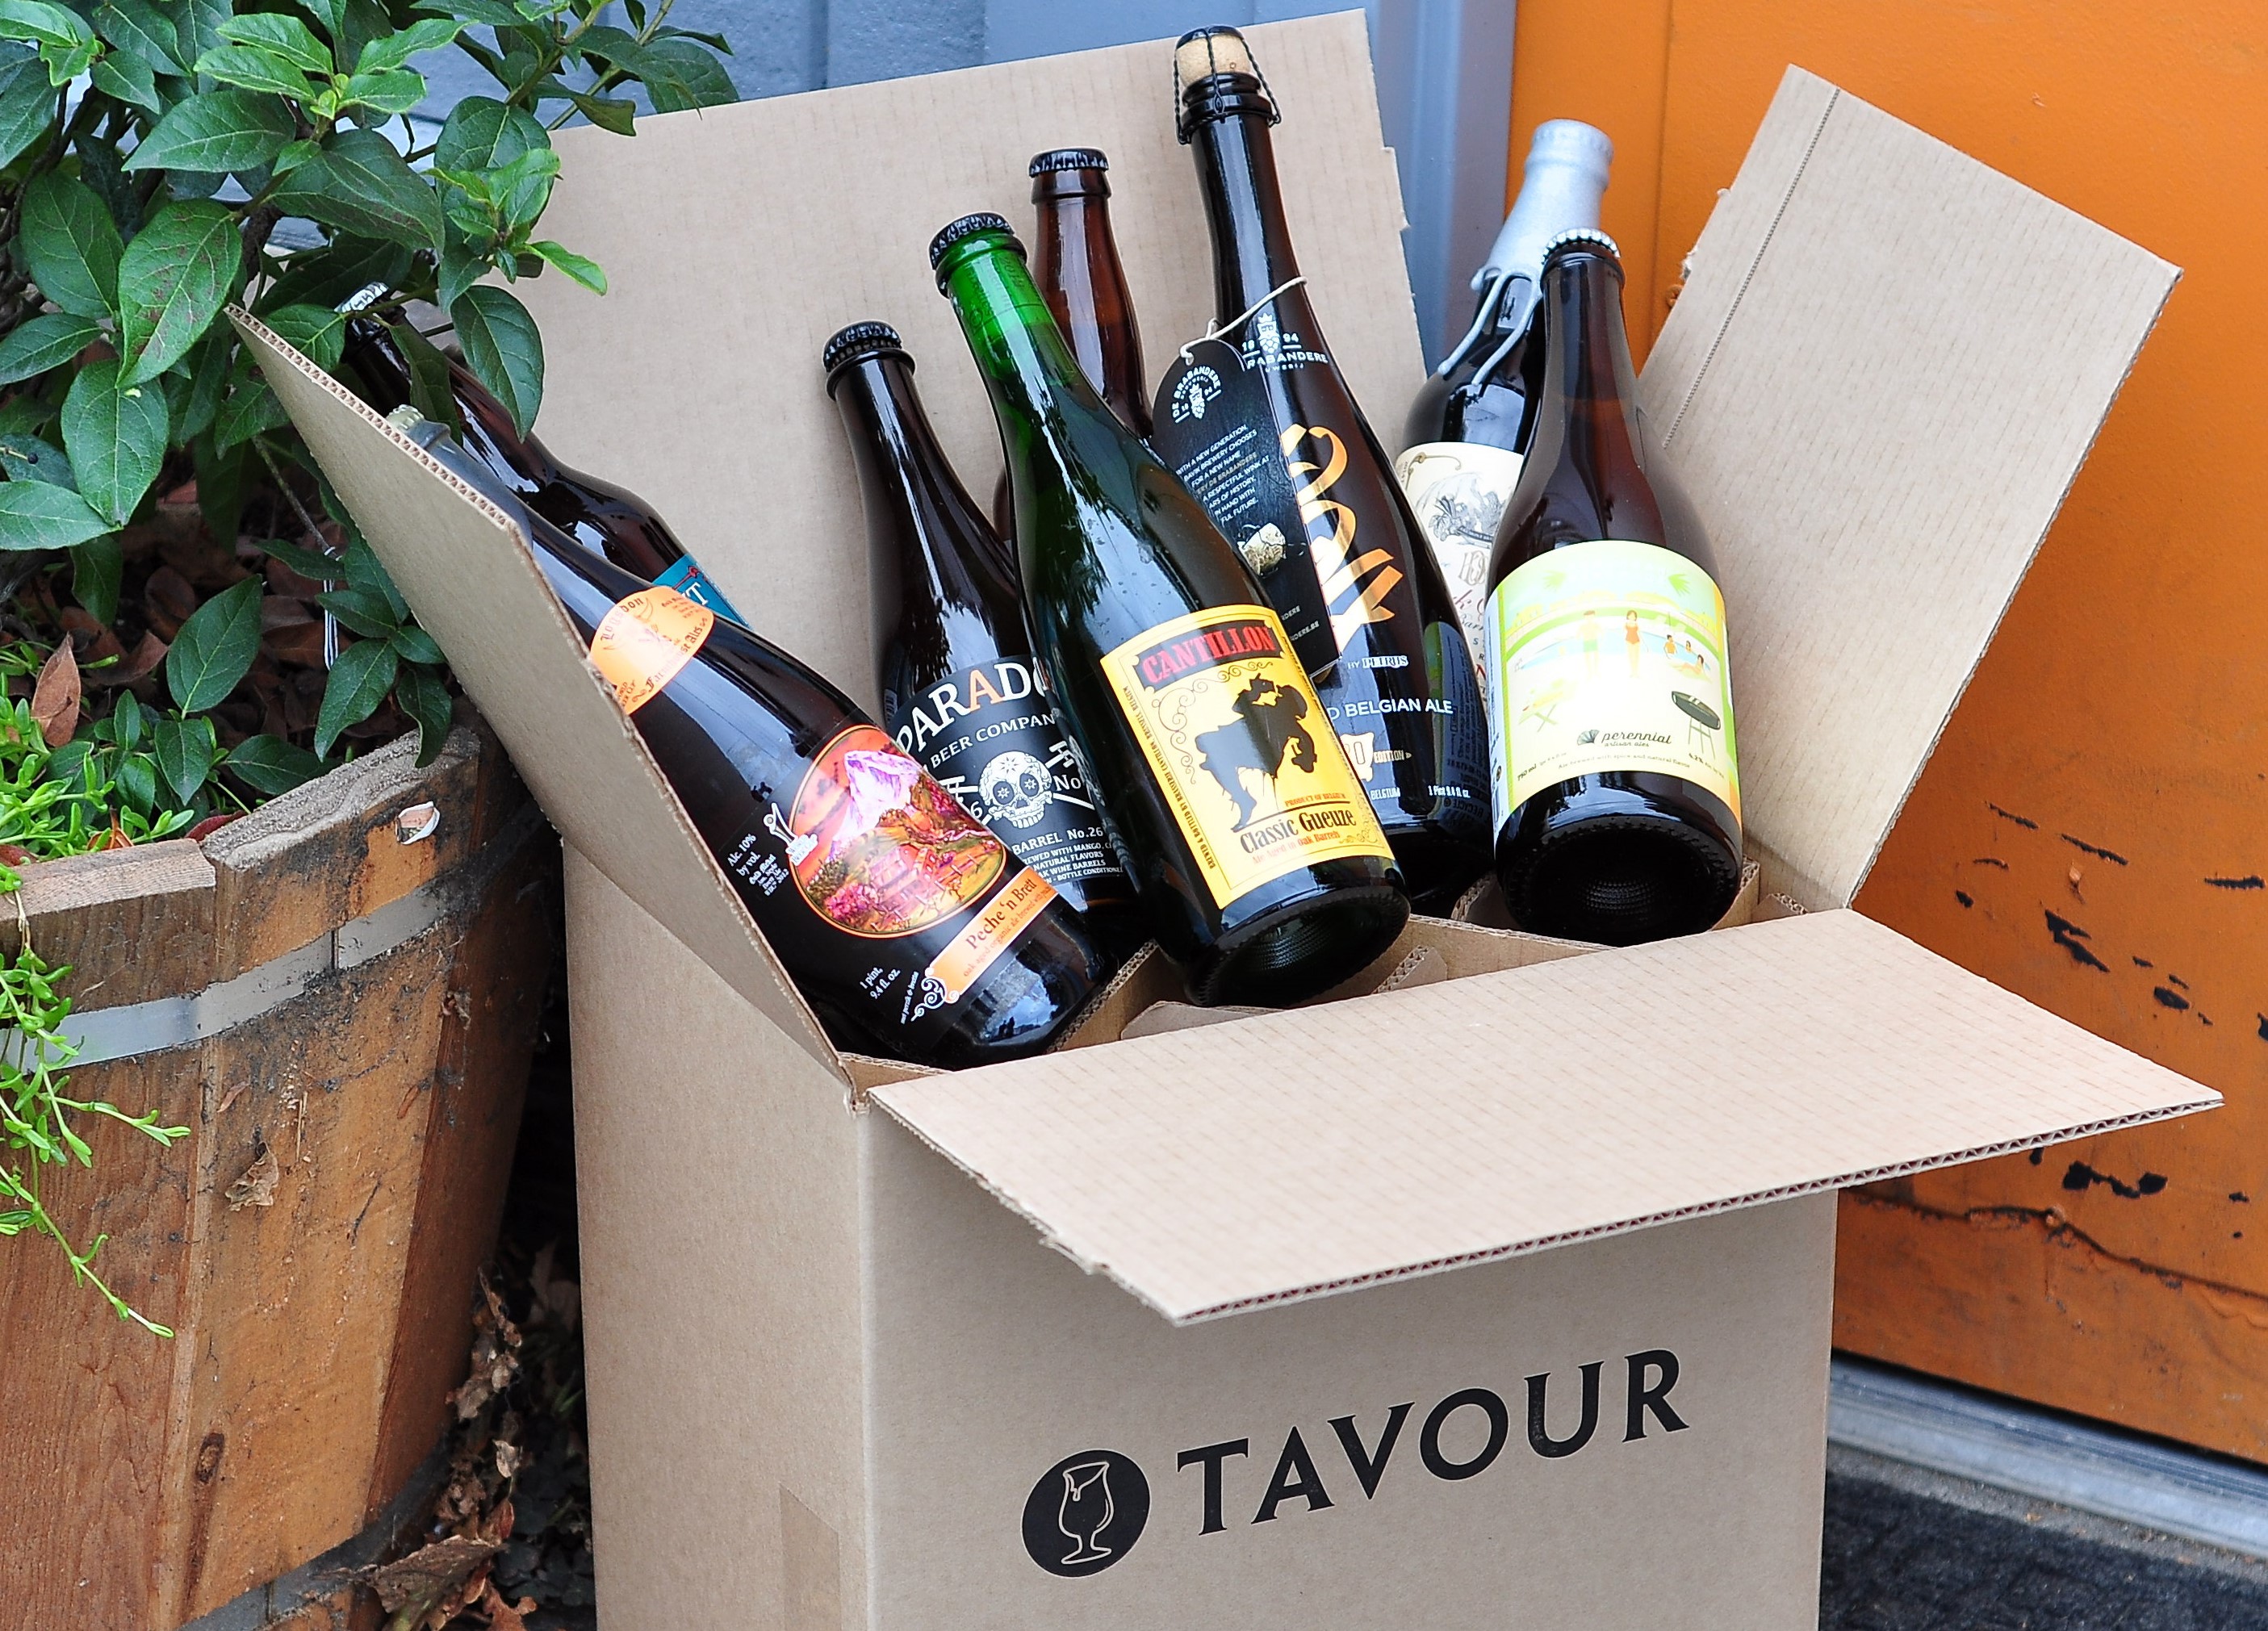 A box of beers you can get shipped directly to your home from Tavour.com